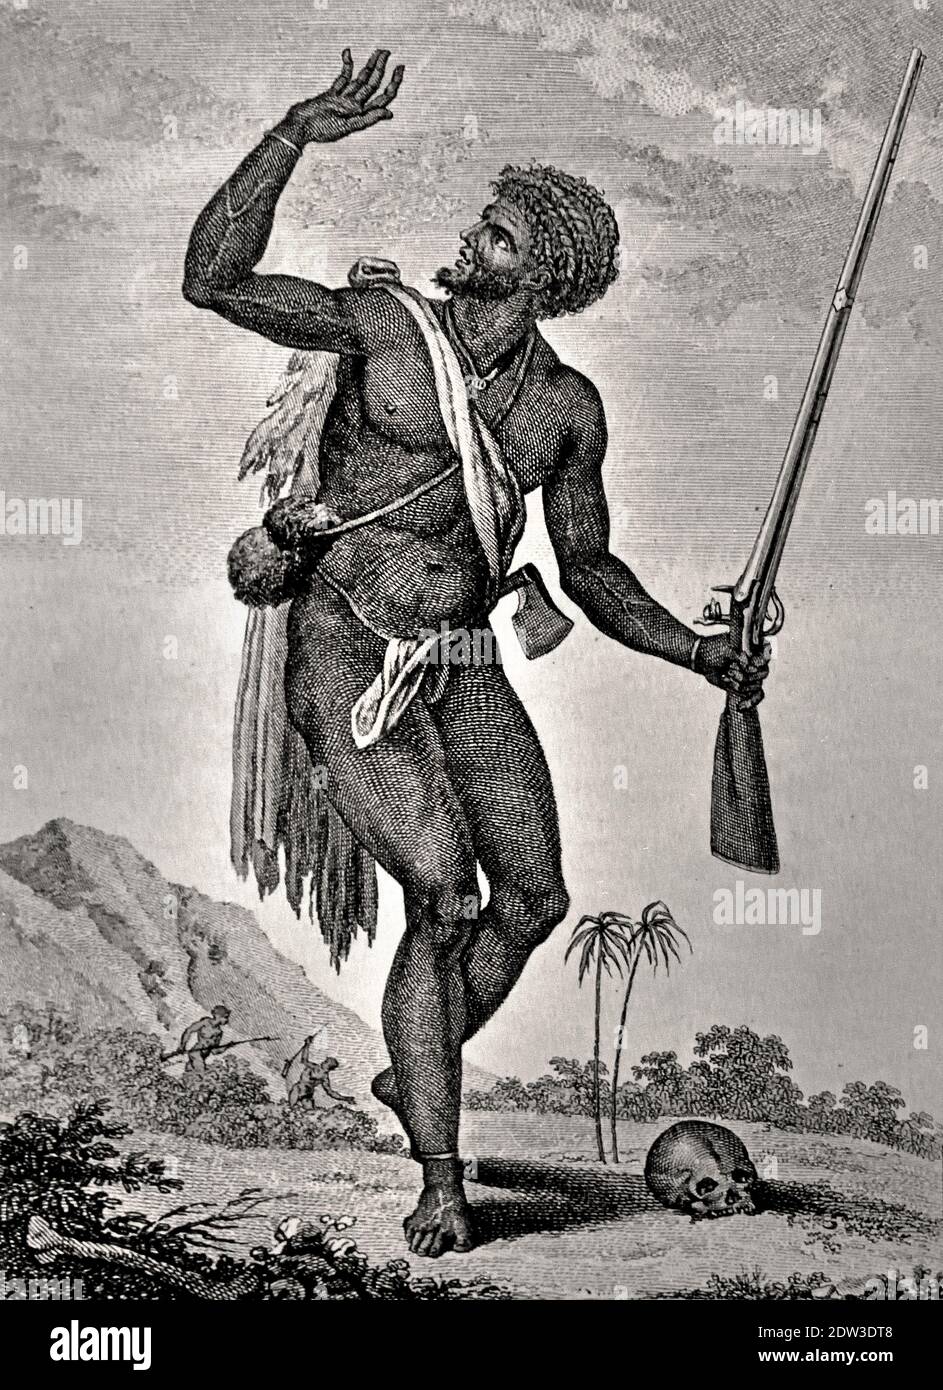 John Gabriel Stedman (1744 – 7 March 1797) was a Dutch-born Scottish colonial soldier, who wrote The Narrative of a Five Years Expedition against the Revolted Negroes of Surinam (1796). This narrative covers his years in Surinam as a soldier in the Dutch military deployed to assist local troops fighting against groups of escaped slaves ( black and white engraving etching ) Stock Photo